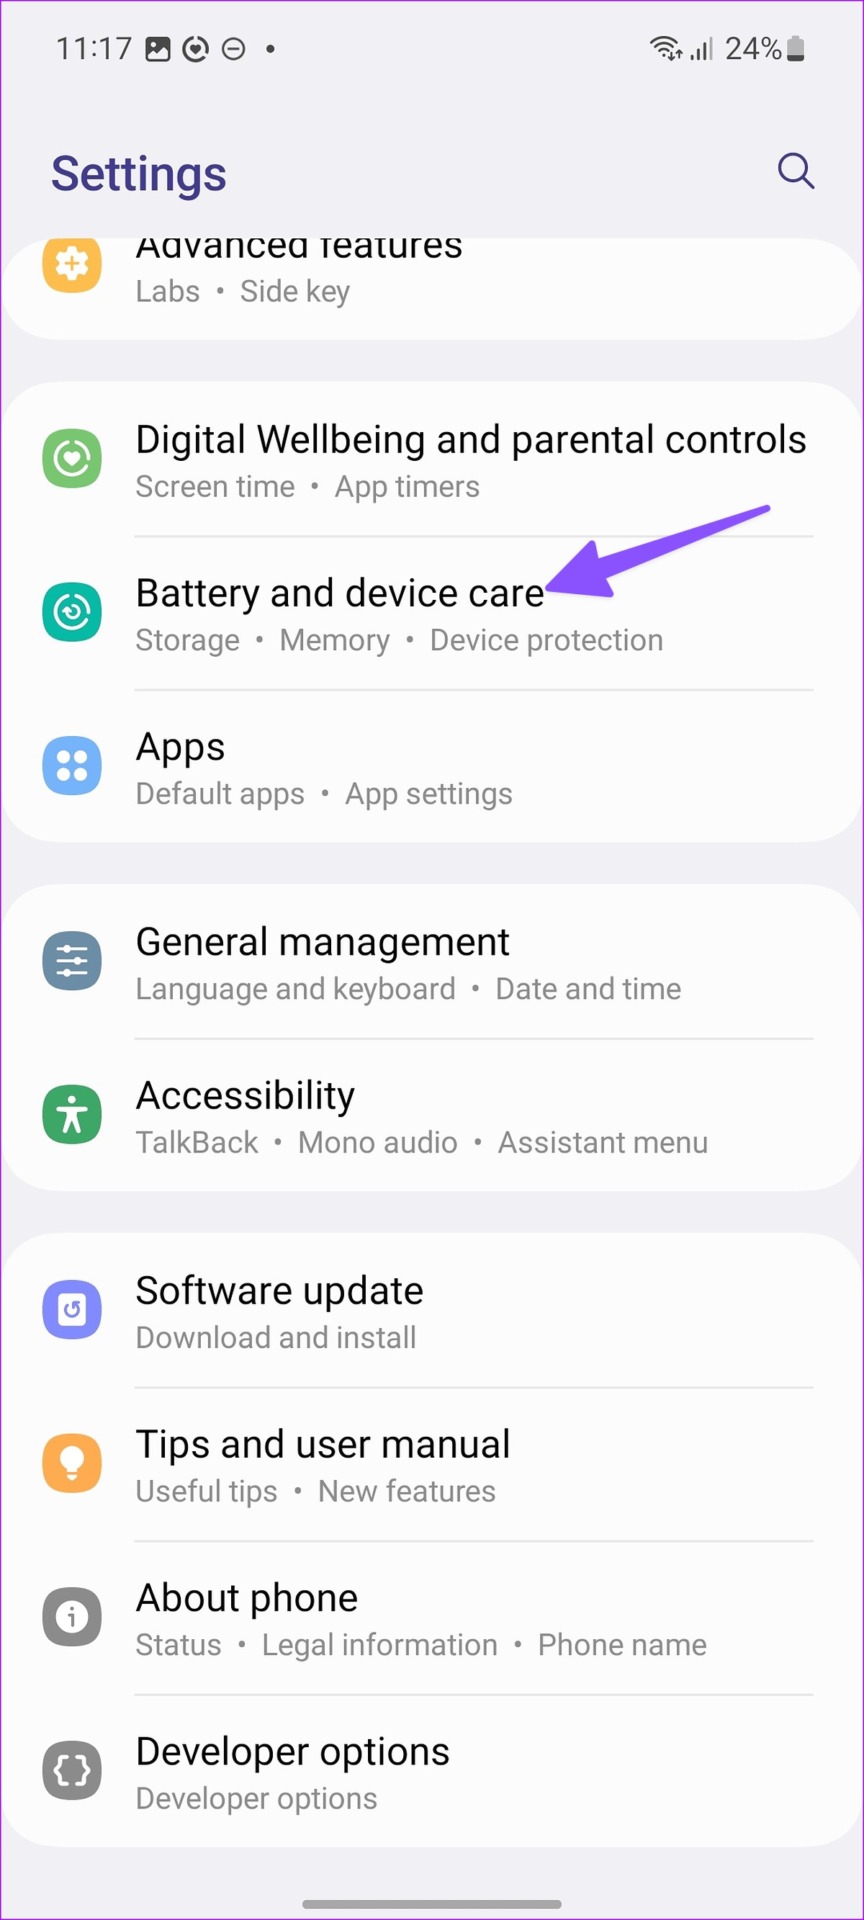 Open battery and device care on Samsung phone